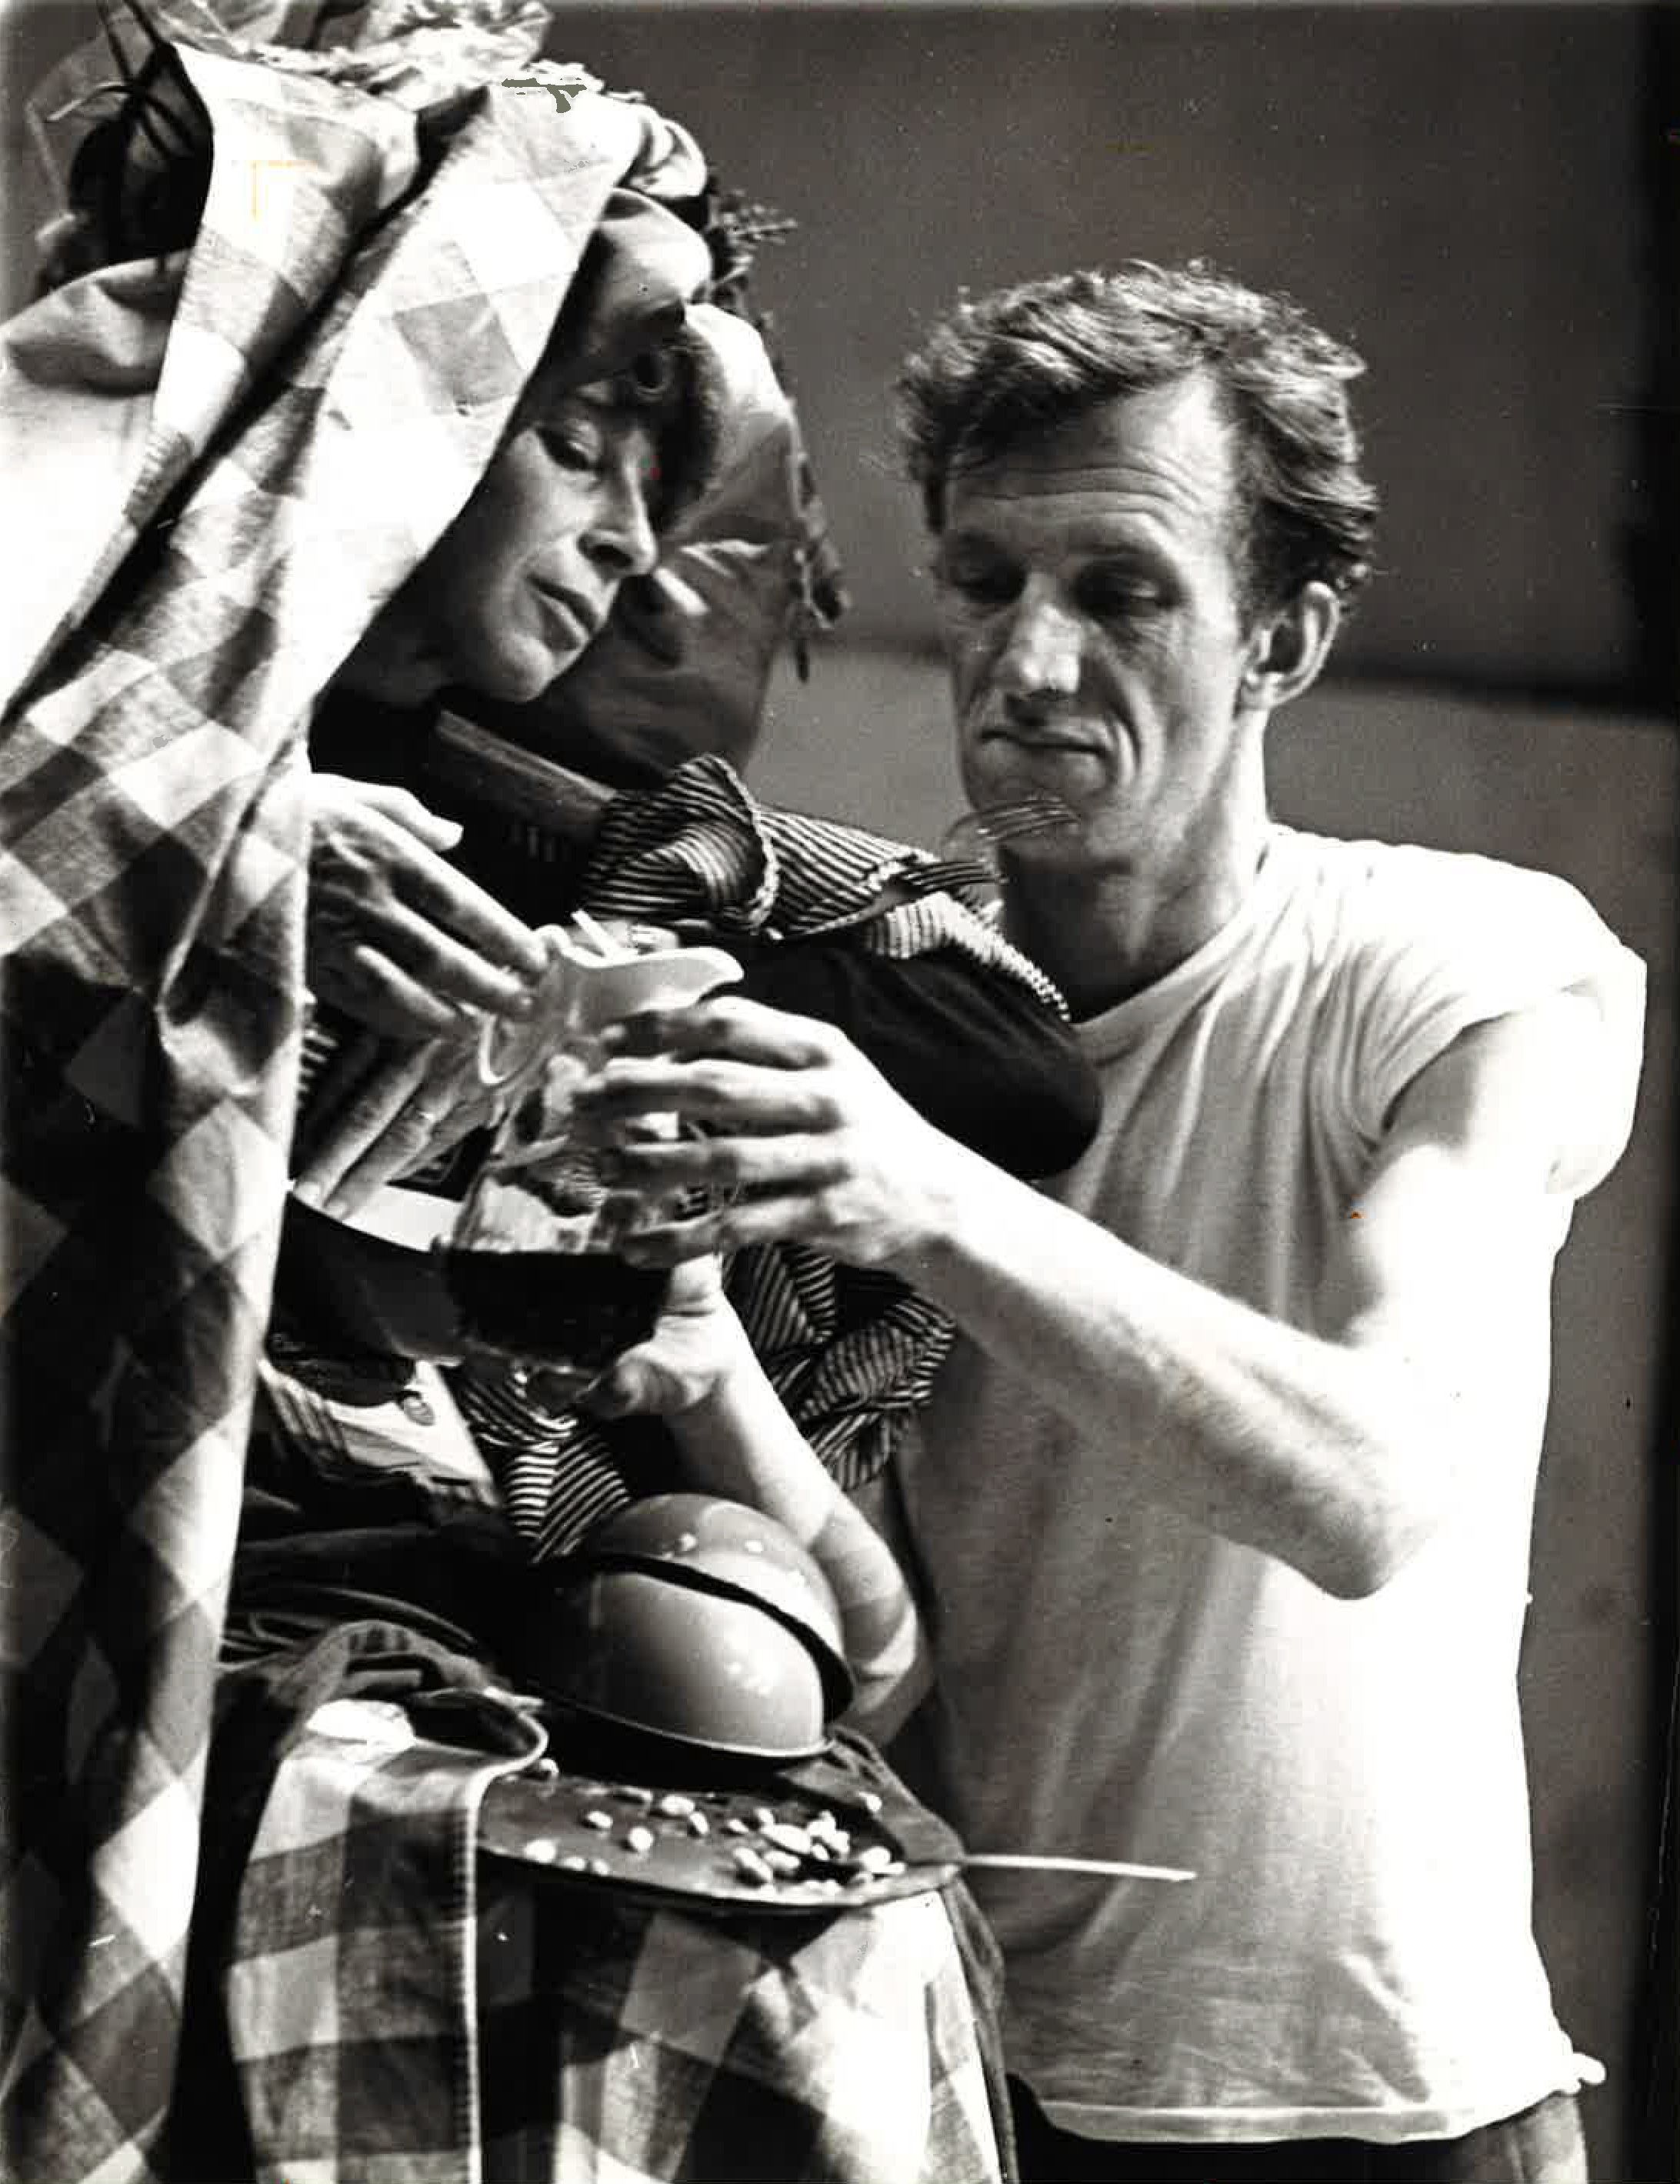 Anna Halprin seems serene as John Graham, in a simple white t-shirt, passes her a pitcher of dark liquid. Halprin is swaddled in a checkered blanket, and is already improbably balancing dirty plates, bowls, and utensils.